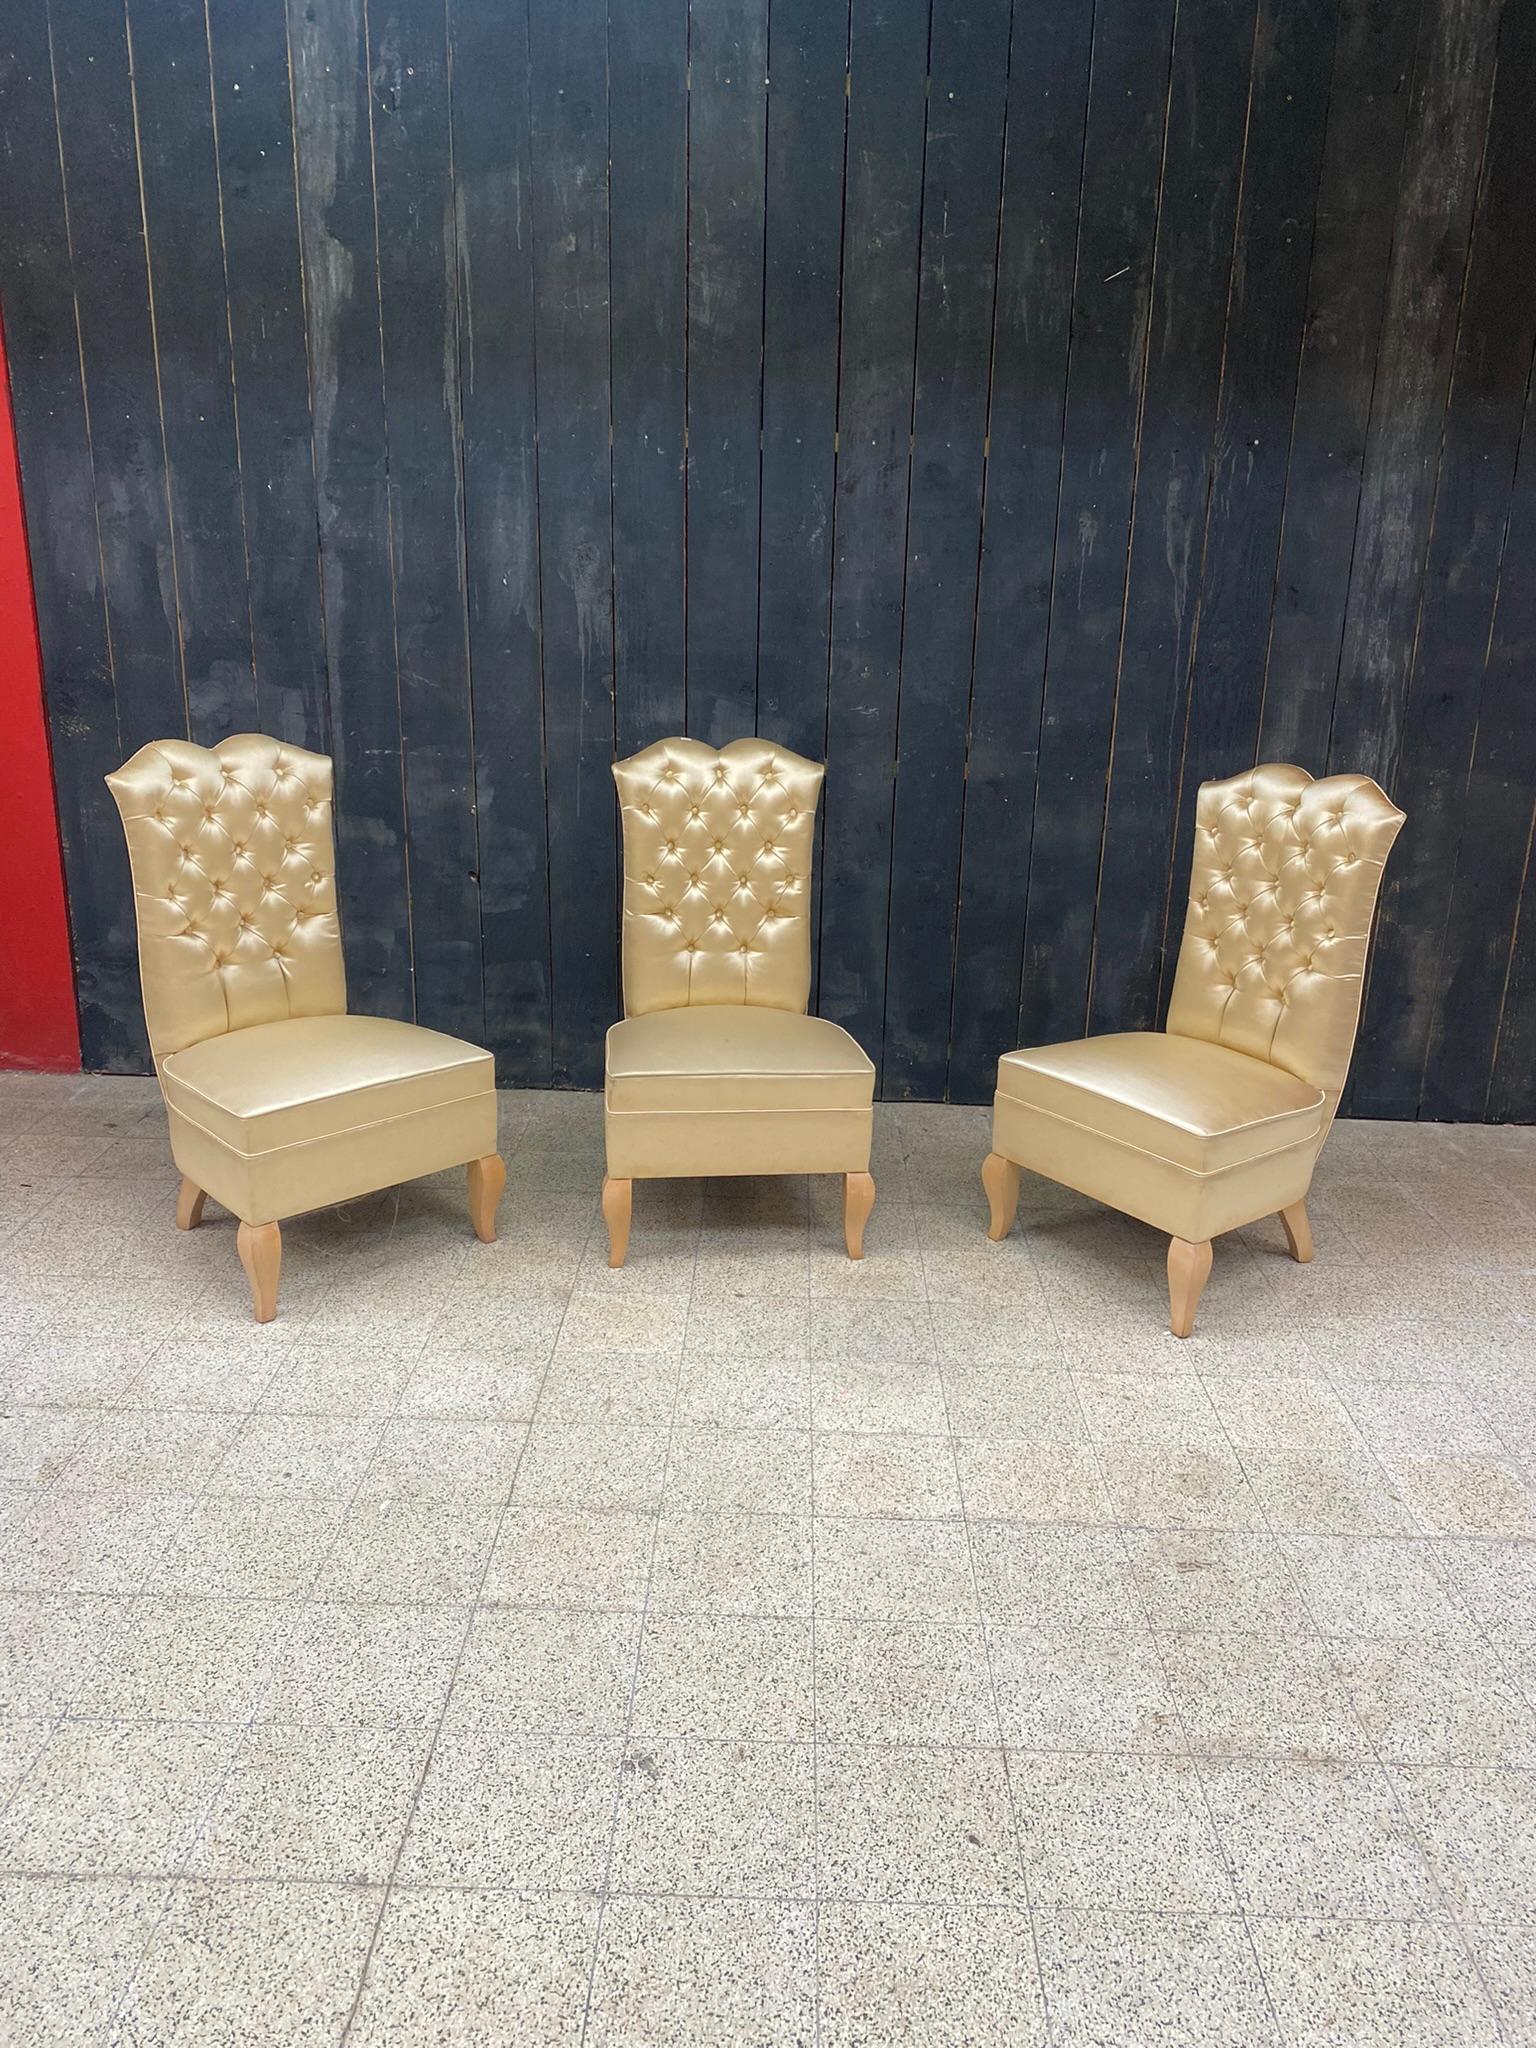 3 art deco bergeres, in sycamore and satin, circa 1950
price is for one, 3 are available